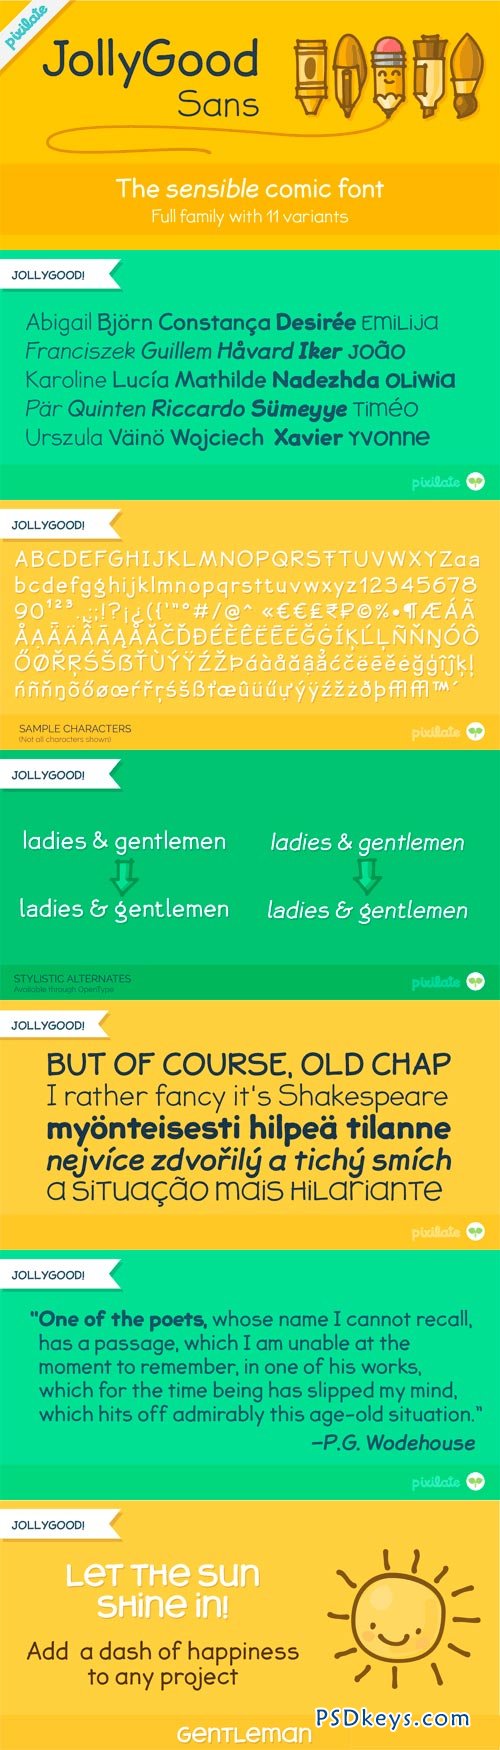 JollyGood Sans Font Family - 12 Fonts for $99